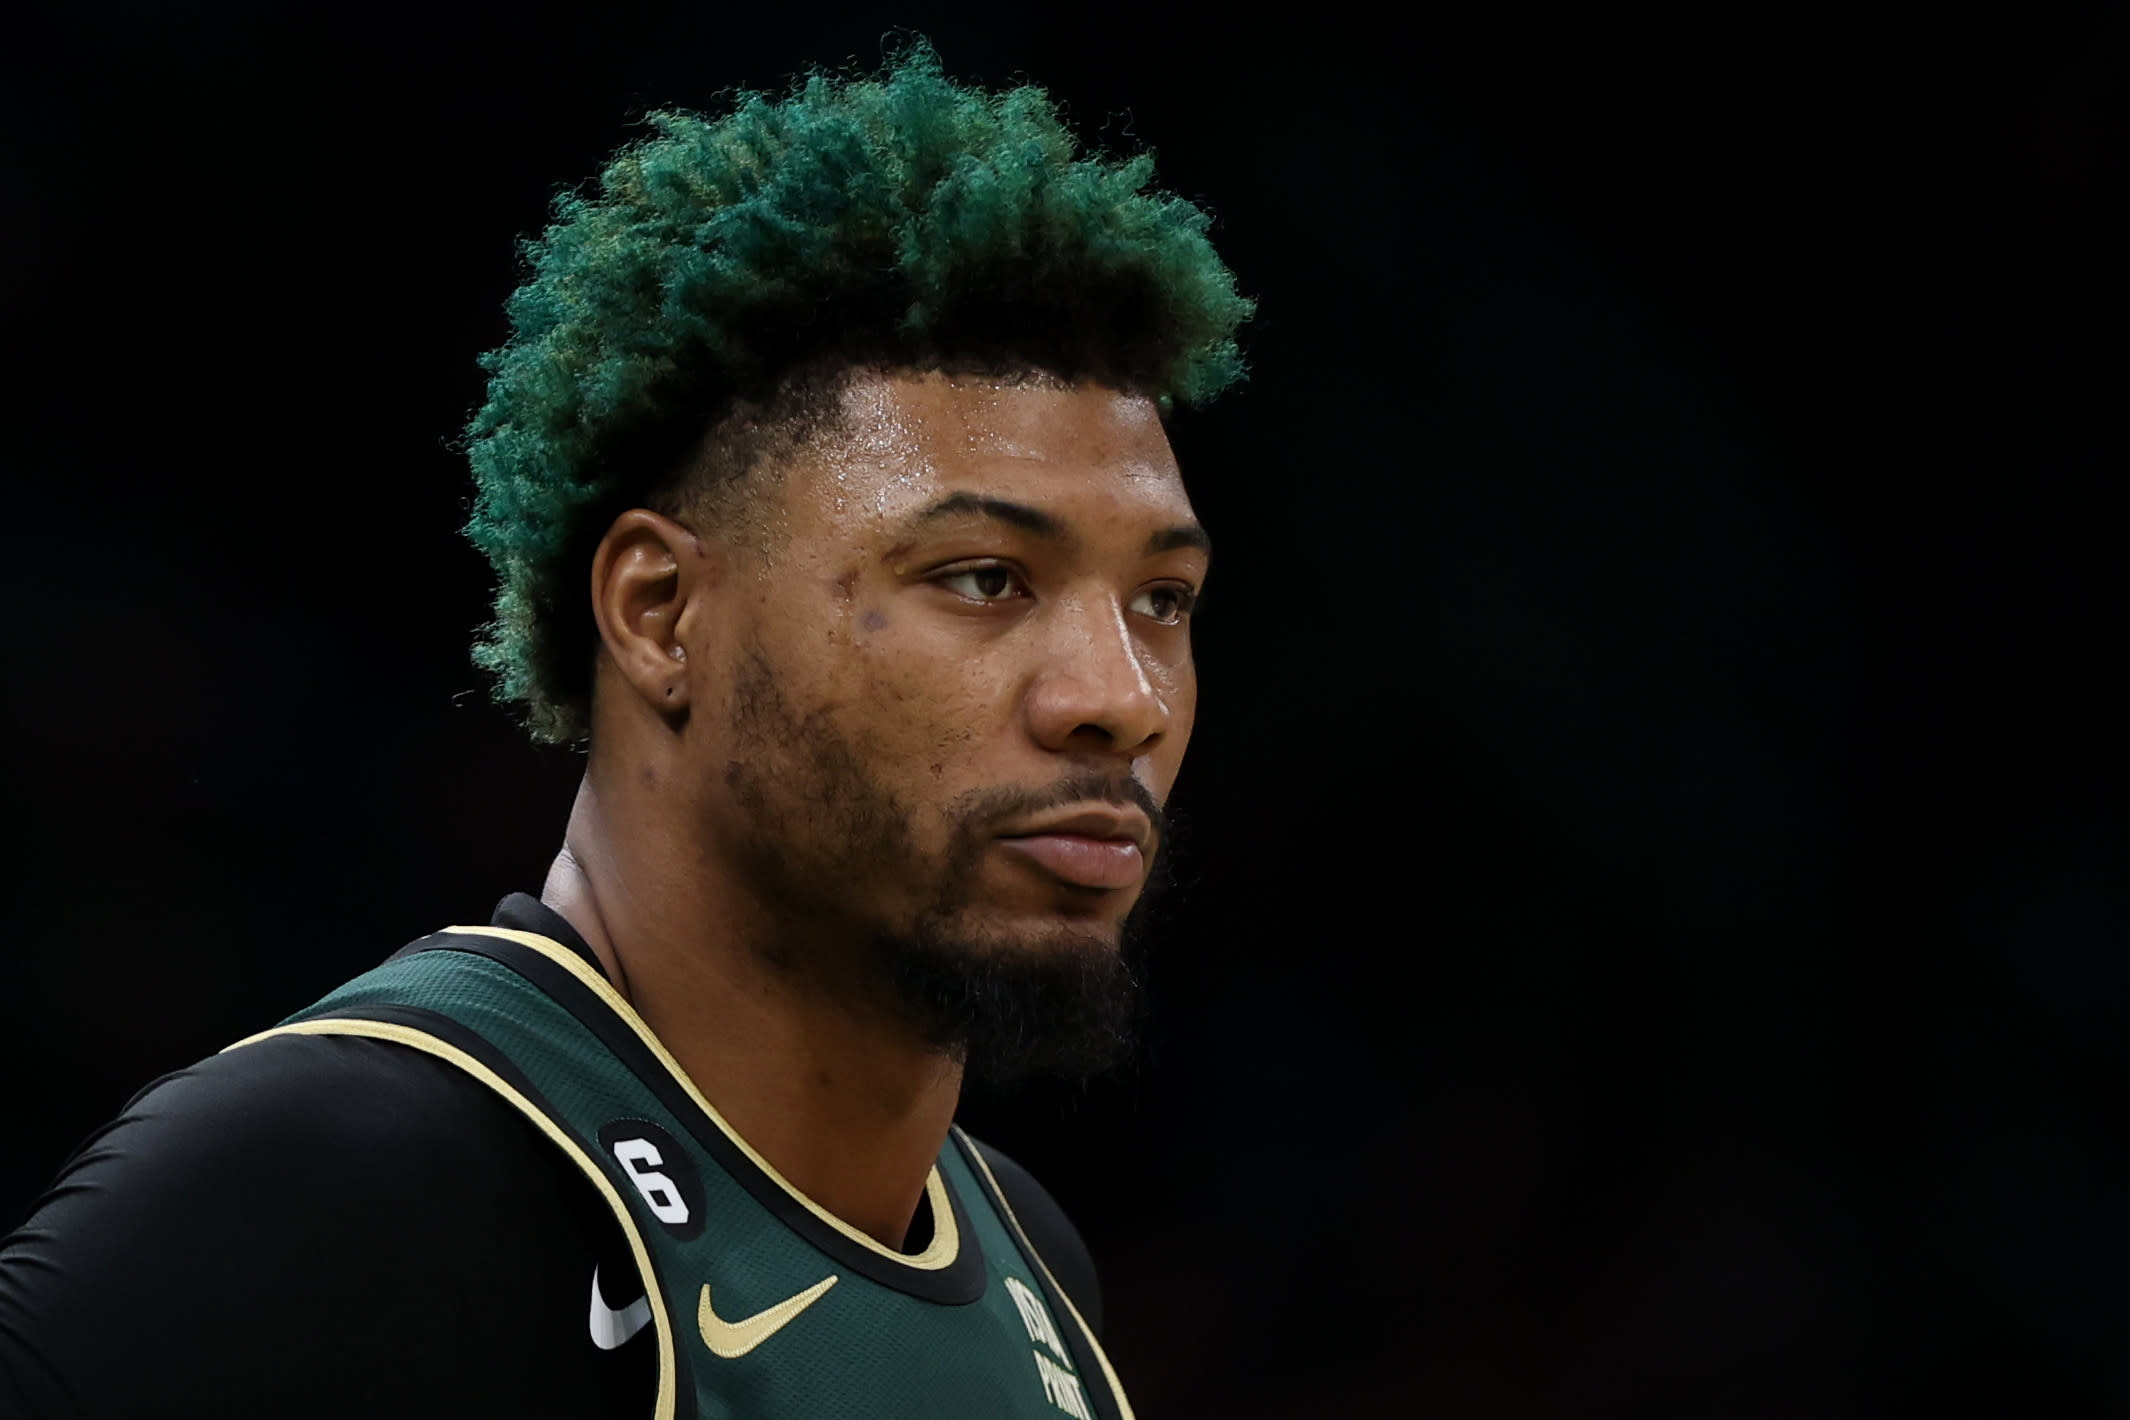 Marcus Smart will face the Boston Celtics for the first time as a member of the Memphis Grizzlies. (Maddie Meyer/Getty Images)